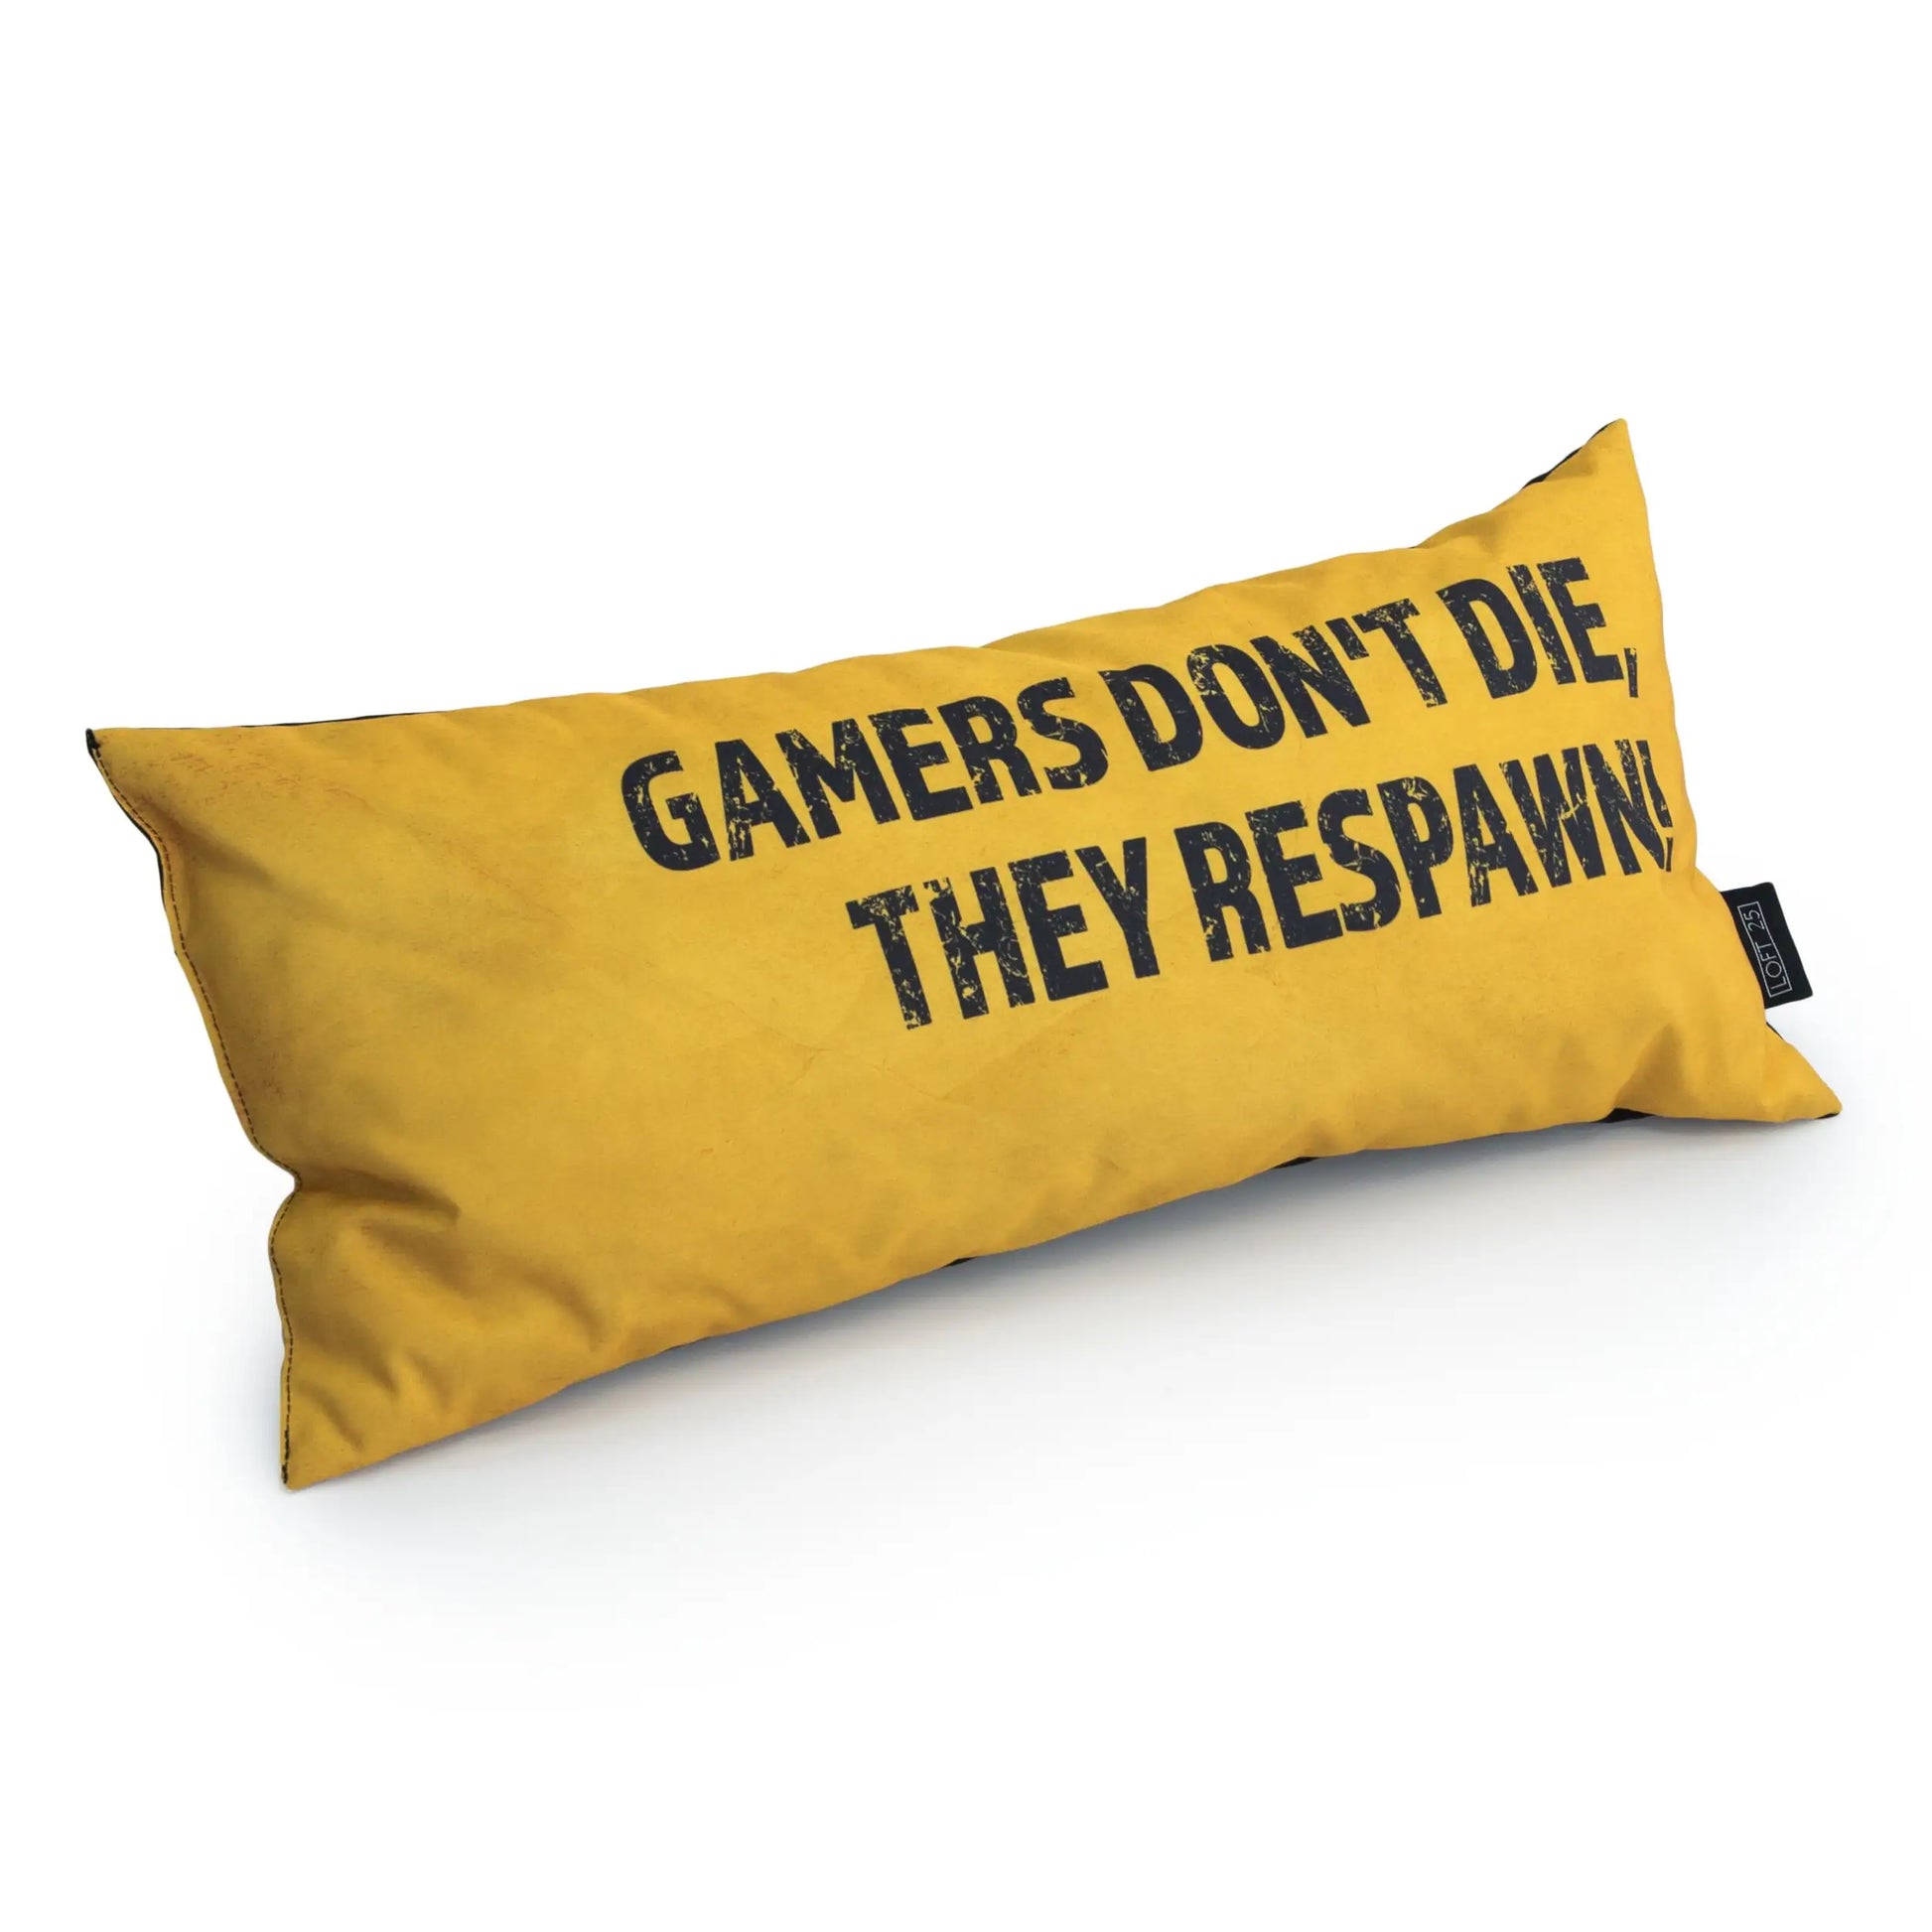 A gamer's pillow with the message of hope: "GAMERS DON'T DIE THEY RESPAWN."